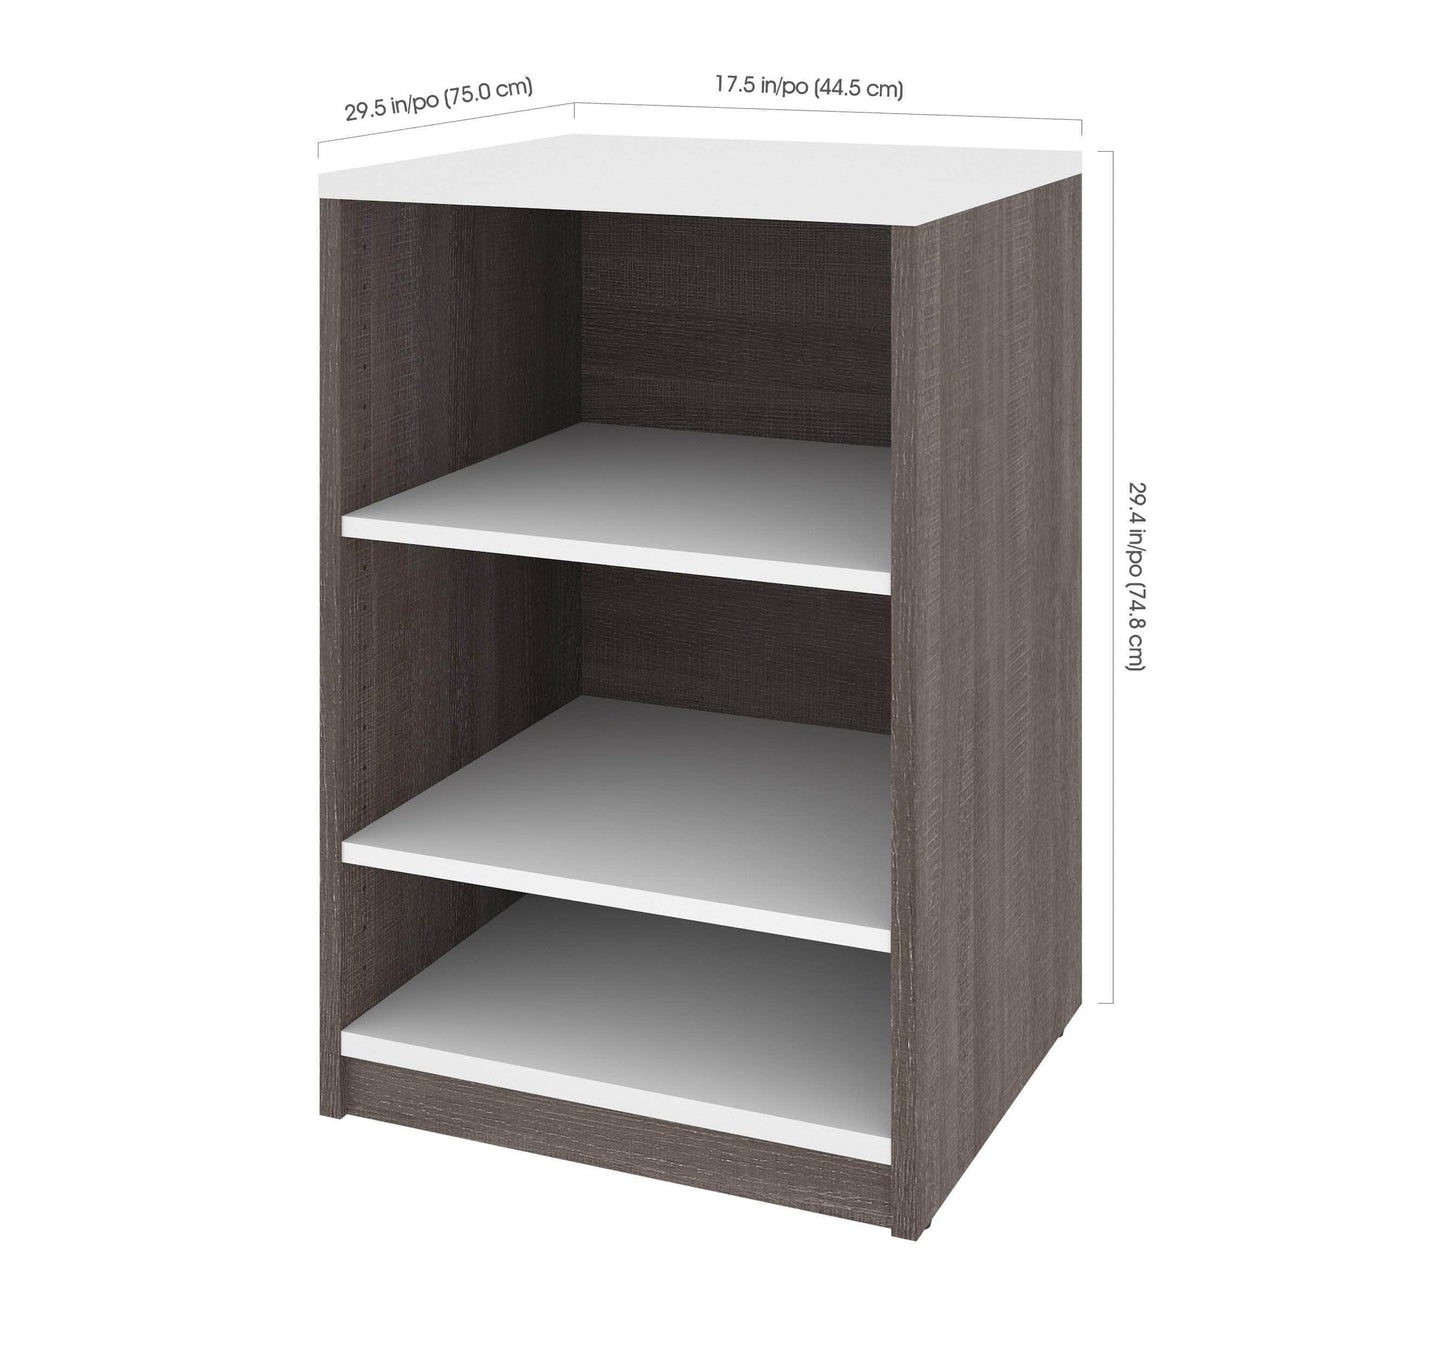 Cielo 59” Closet Organizer with 4 Drawers - In 2 Colours